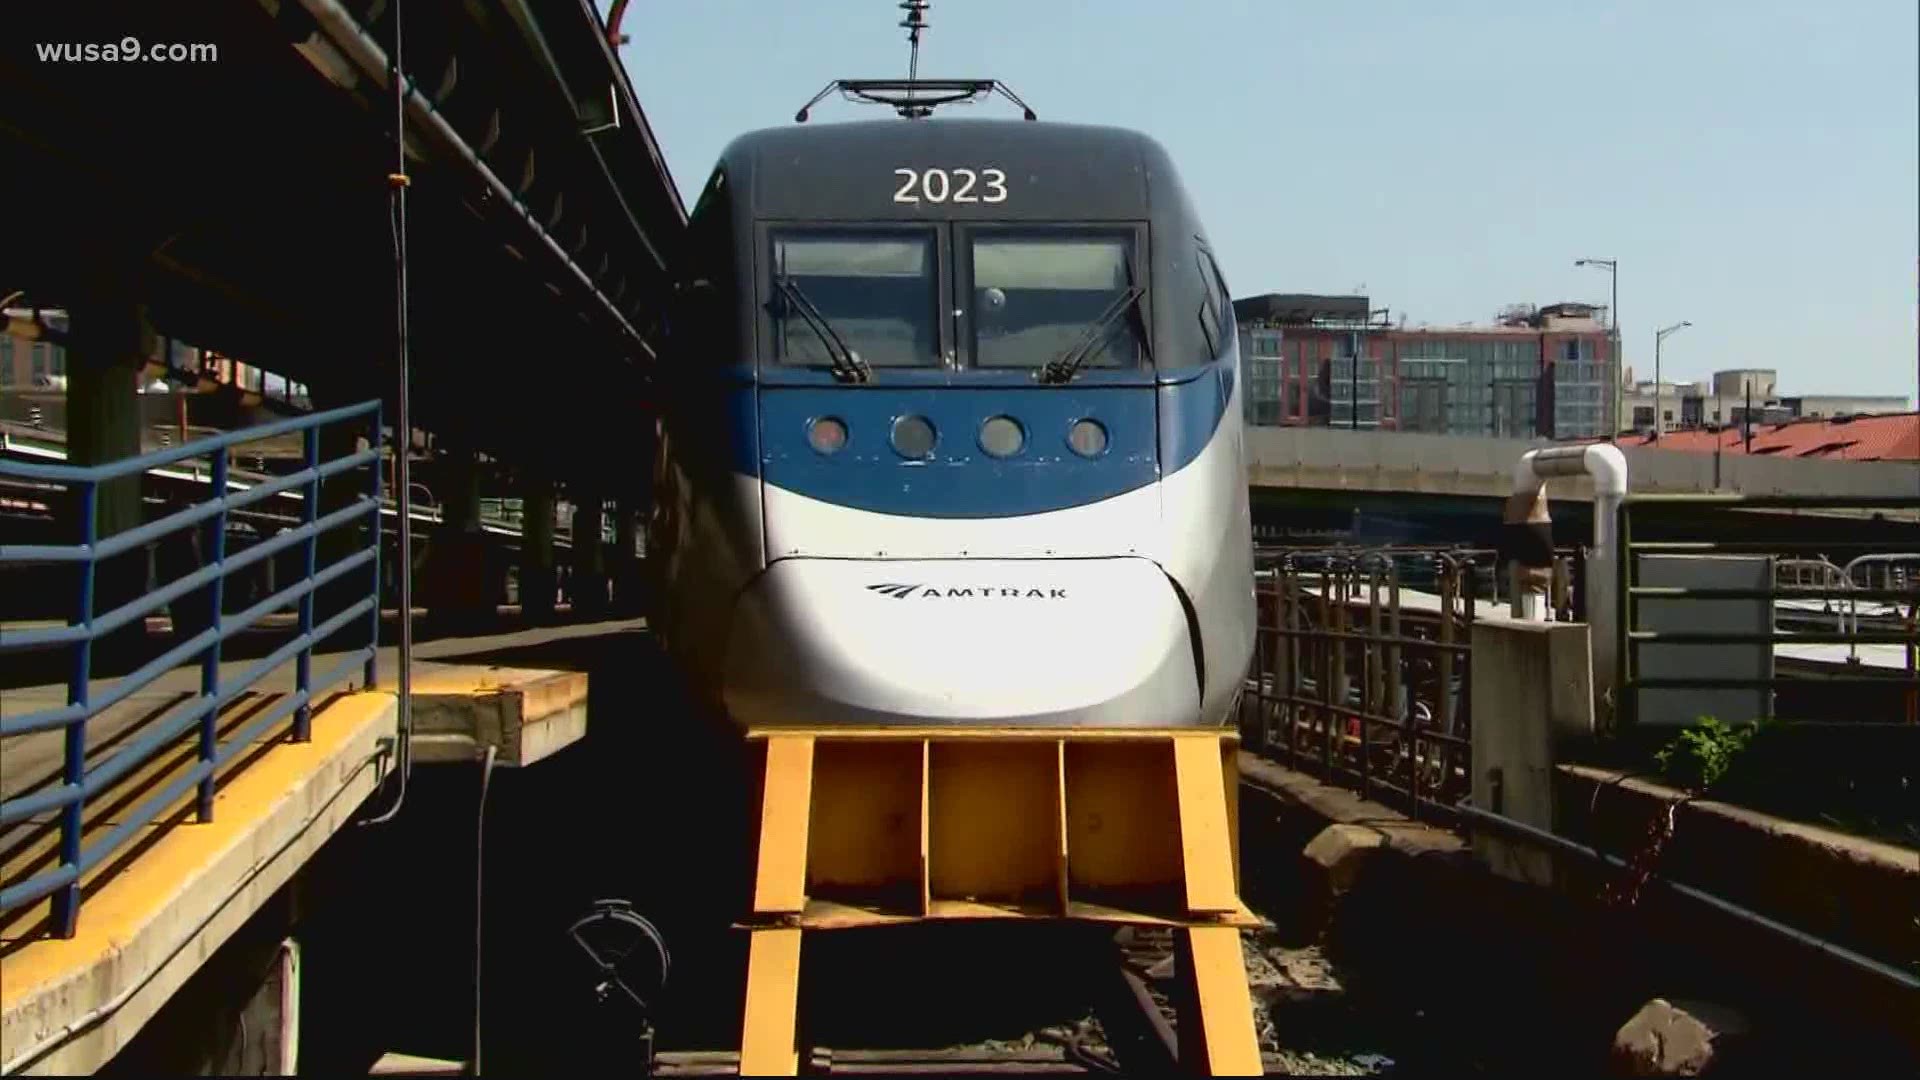 Amtrak says they will deny service to customers who do not abide by the new face-covering policy.